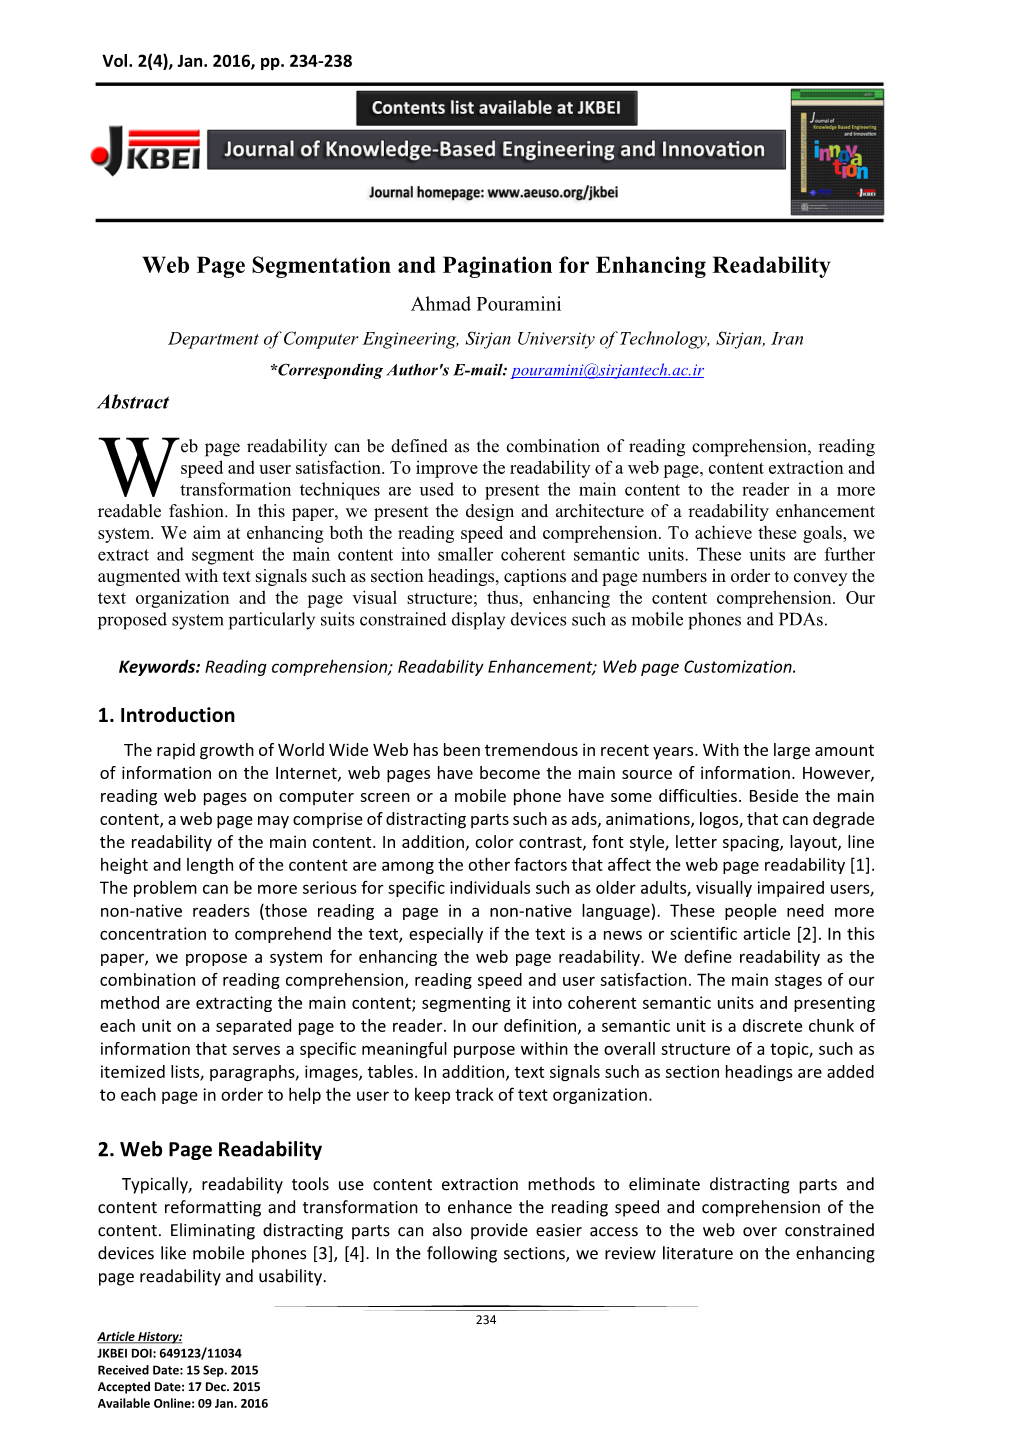 Web Page Segmentation and Pagination for Enhancing Readability